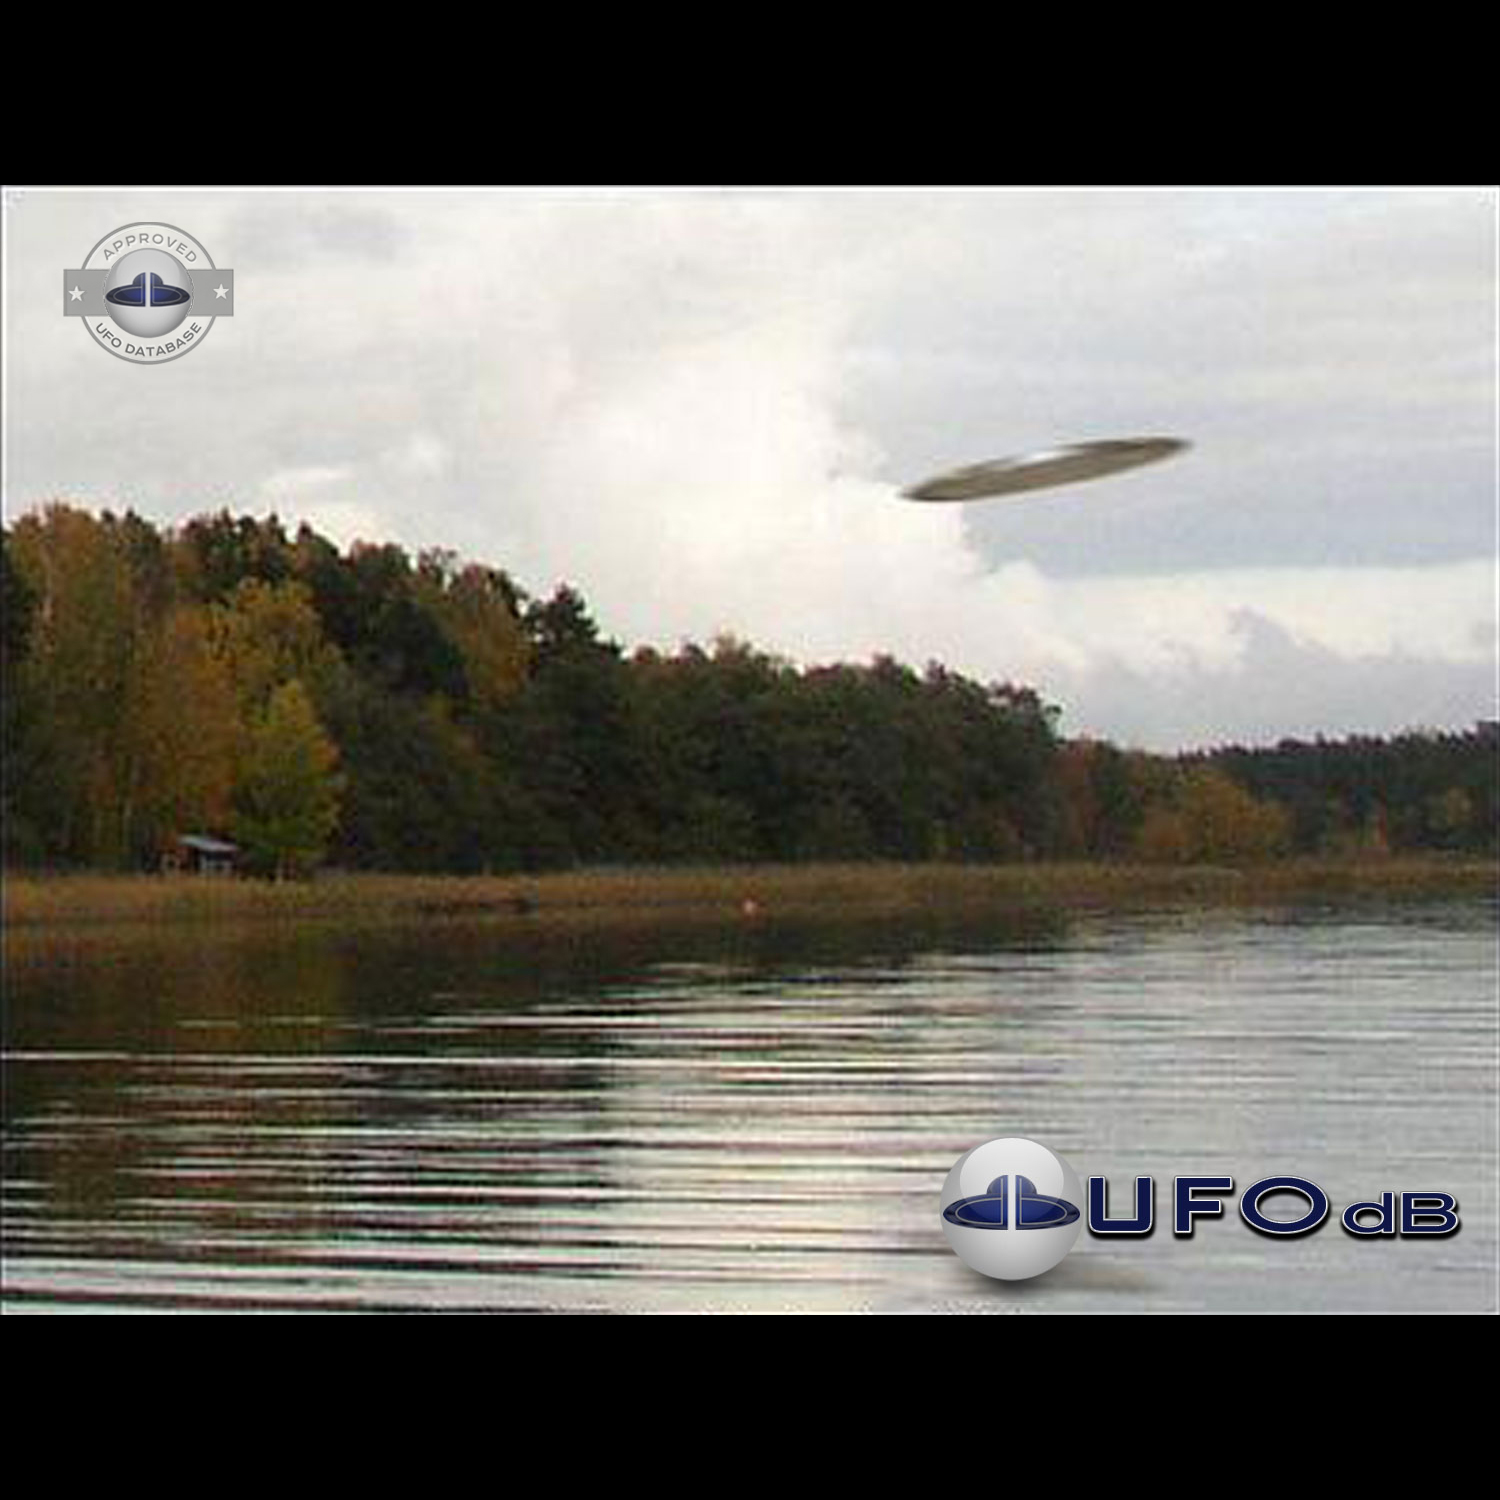 Clean UFO picture UFO disc flying over a lake in Kustavi Finland UFO Picture #56-1